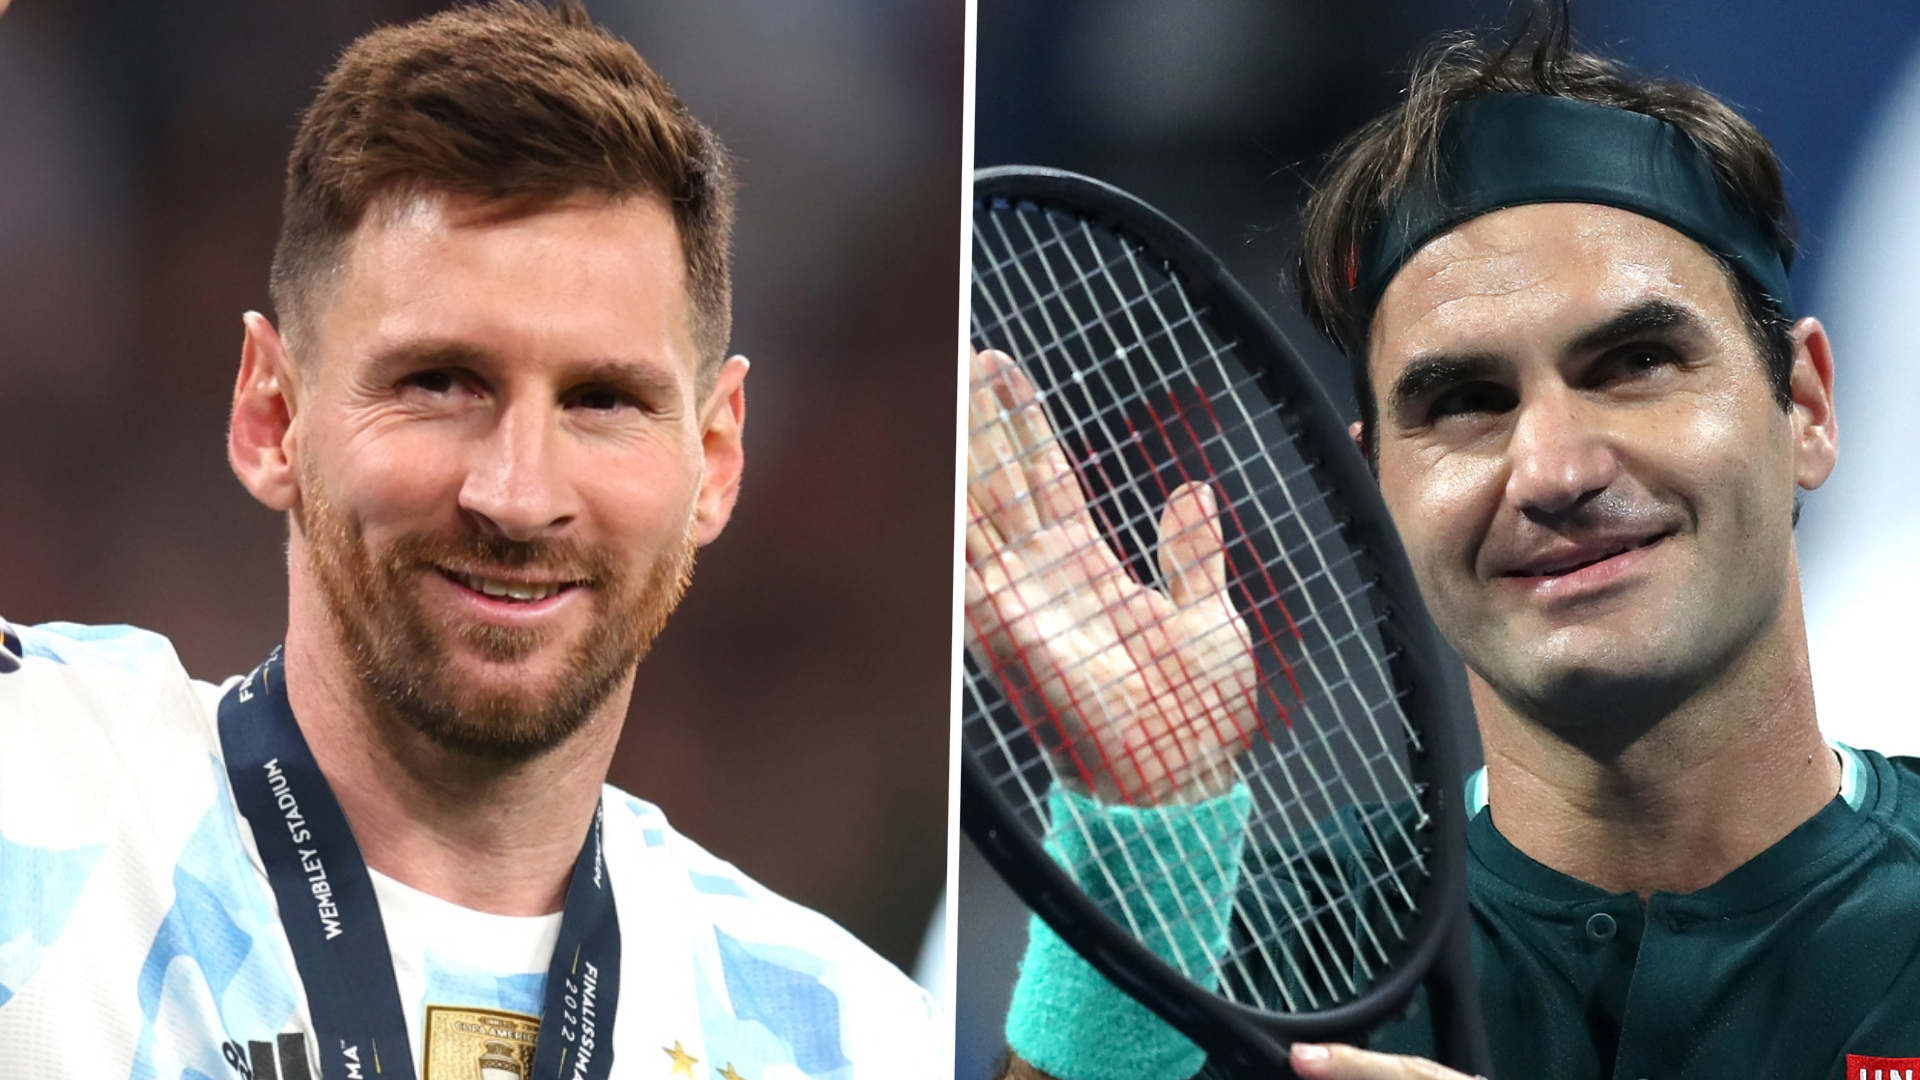 Lionel Messi gets beautiful tribute from Roger Federer as tennis star compares his passes to art Goal